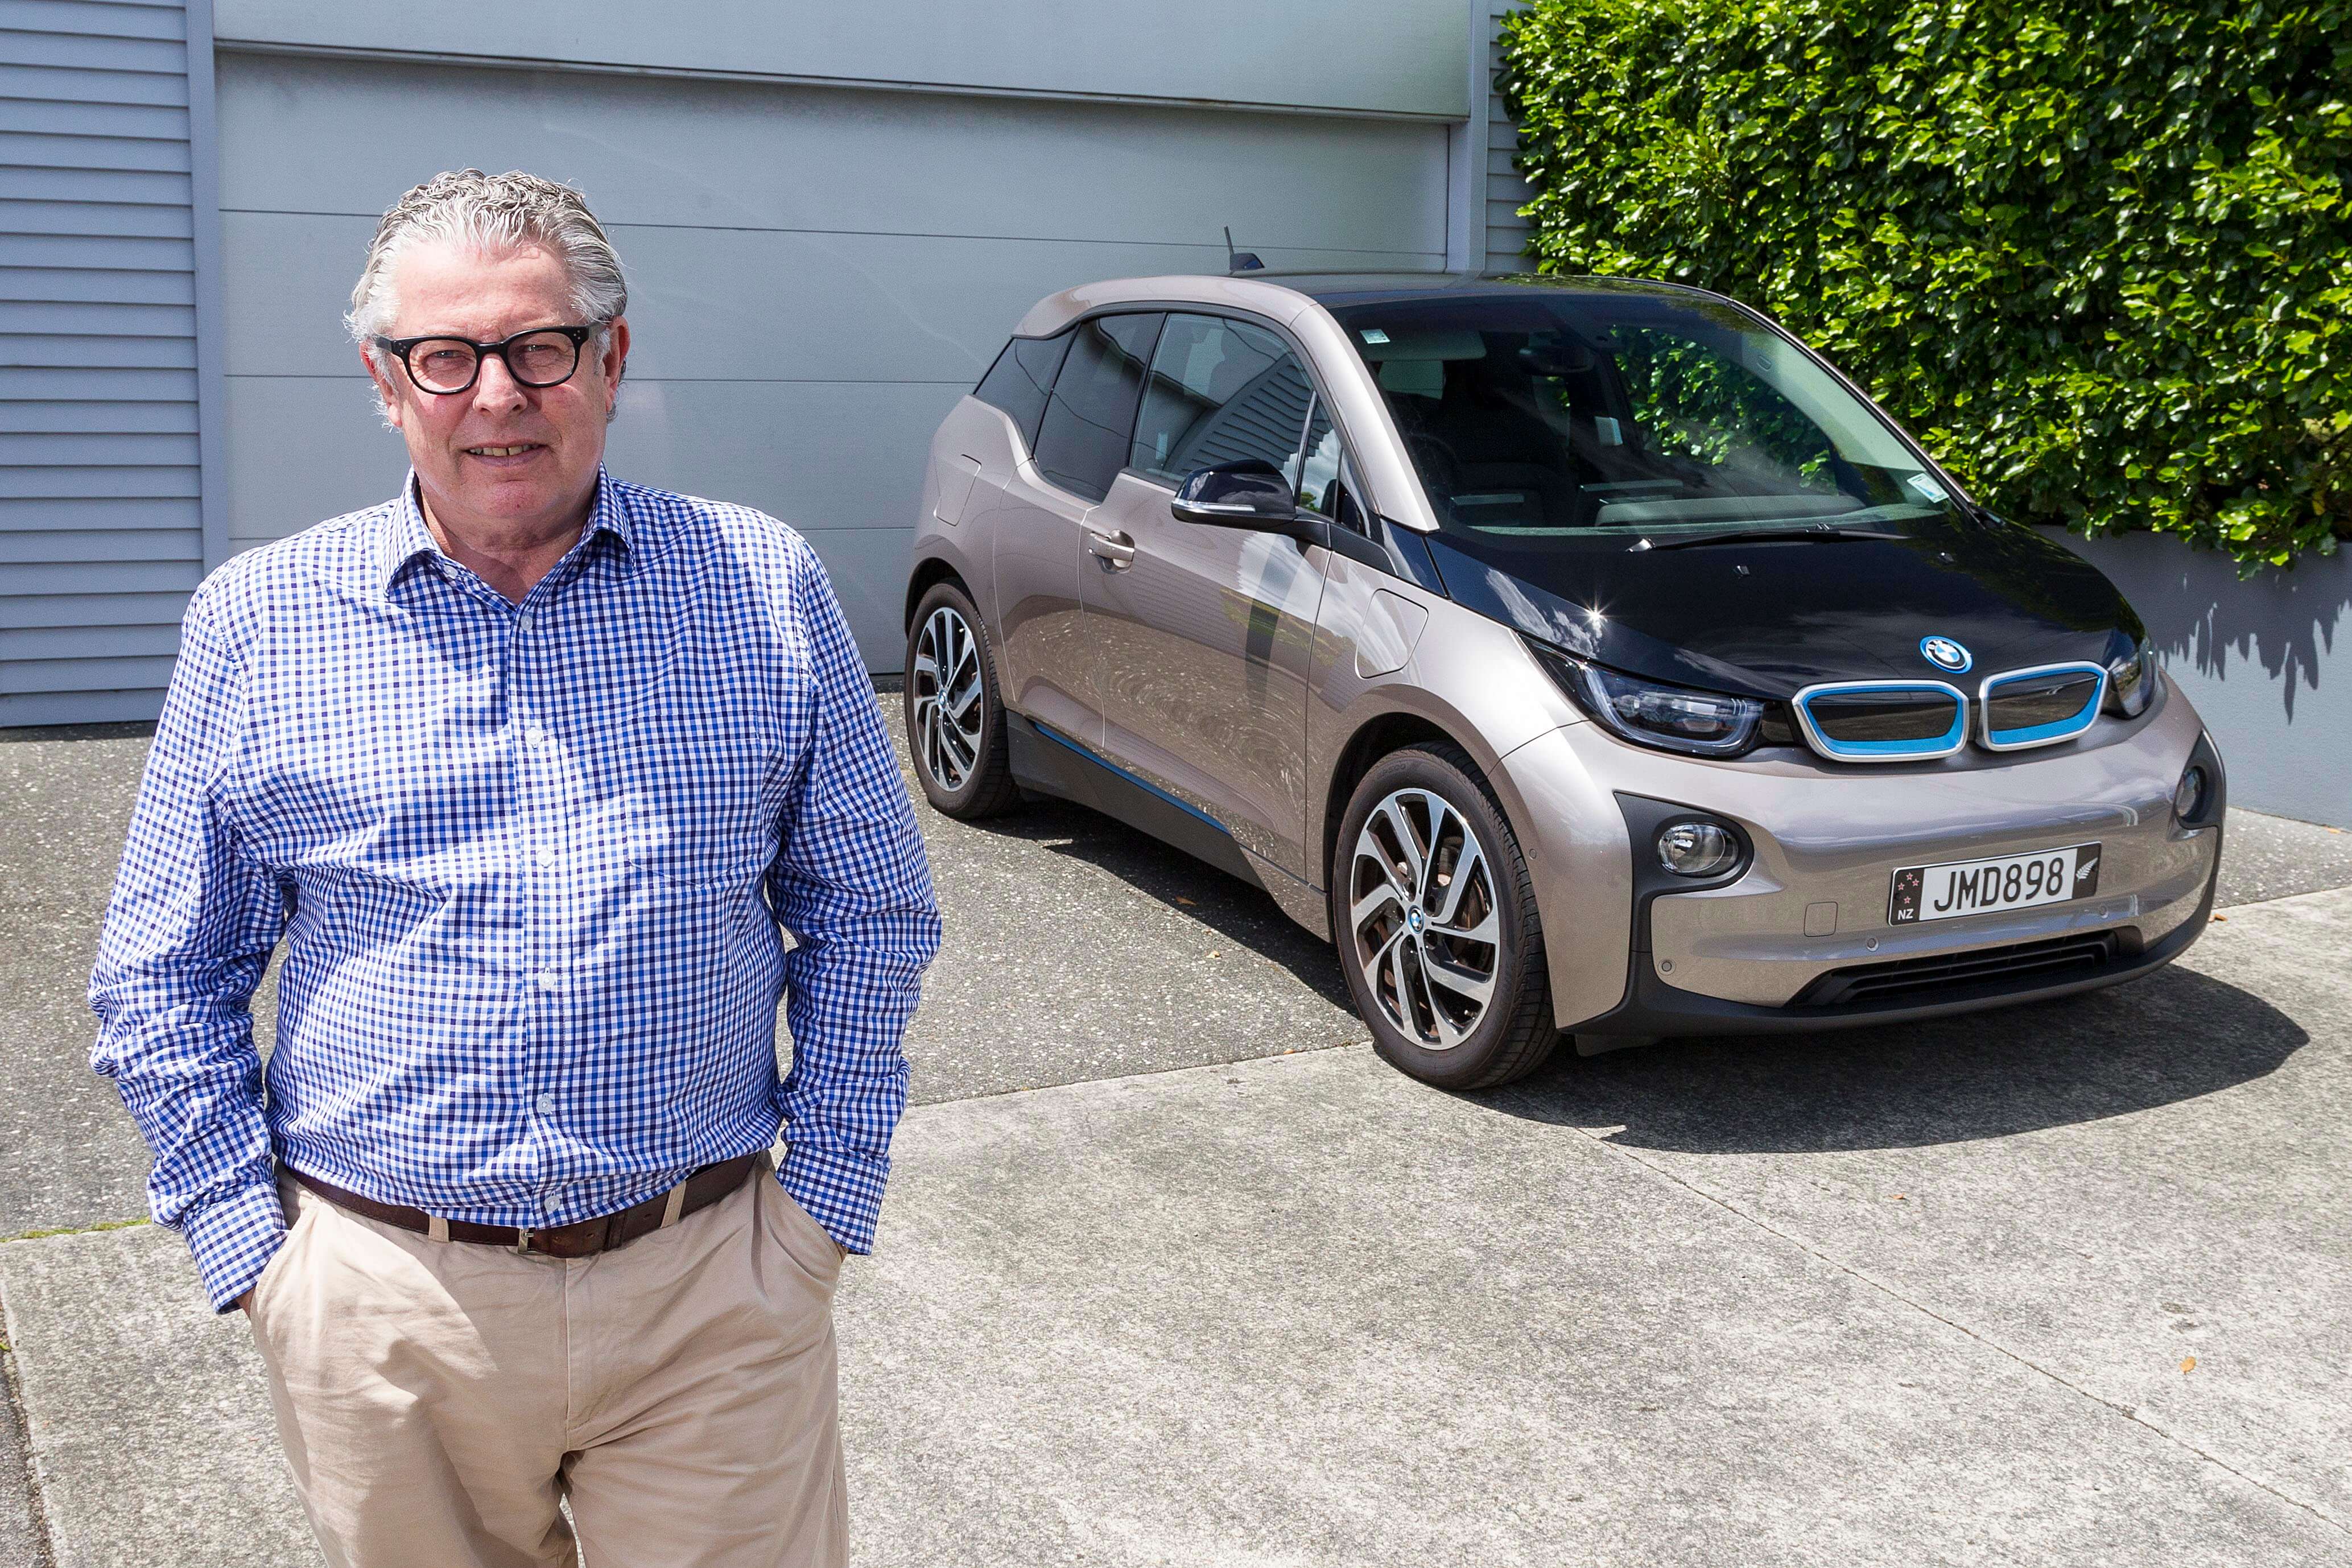 Government push needed on EV incentives